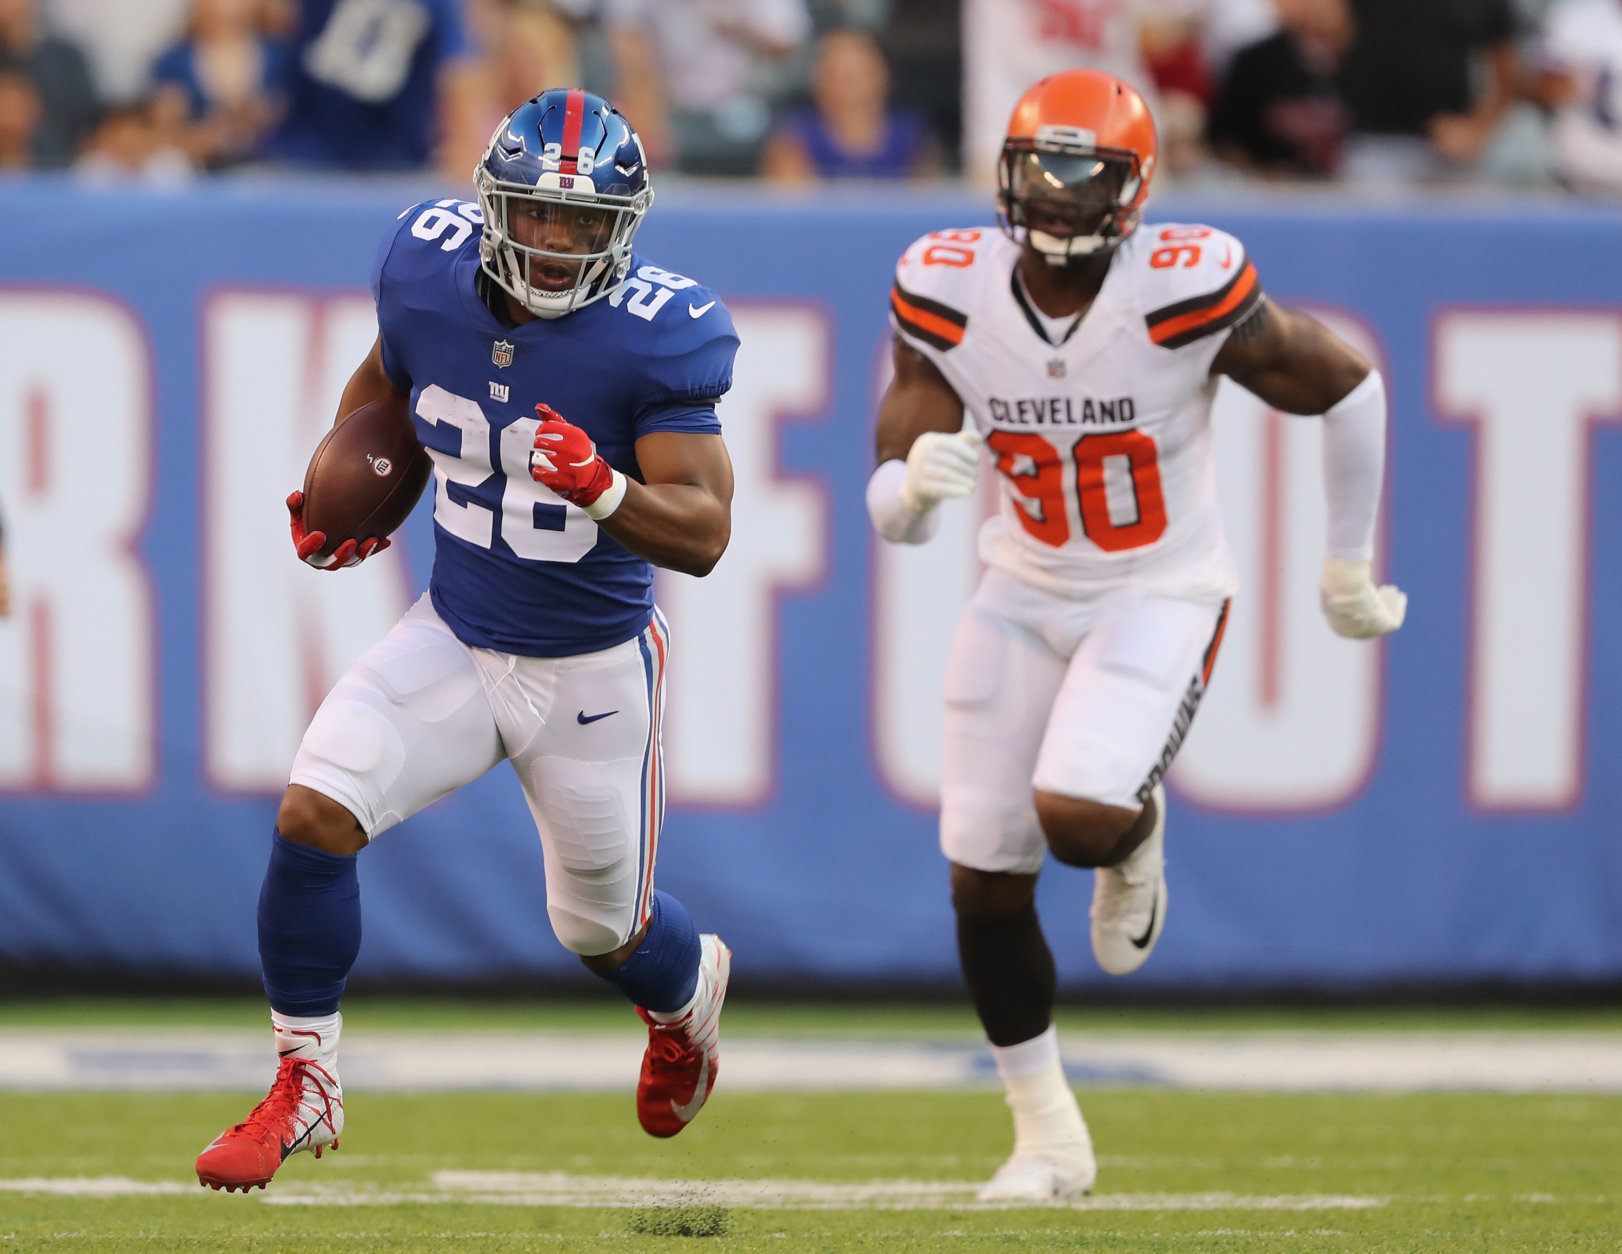 EAST RUTHERFORD, NJ - AUGUST 09:  Saquon Barkley #26 of the New York Giants carries the ball as Emmanuel Ogbah #90 of the Cleveland Browns in the first quarter during their preseason game on August 9,2018 at MetLife Stadium in East Rutherford, New Jersey.  (Photo by Elsa/Getty Images)